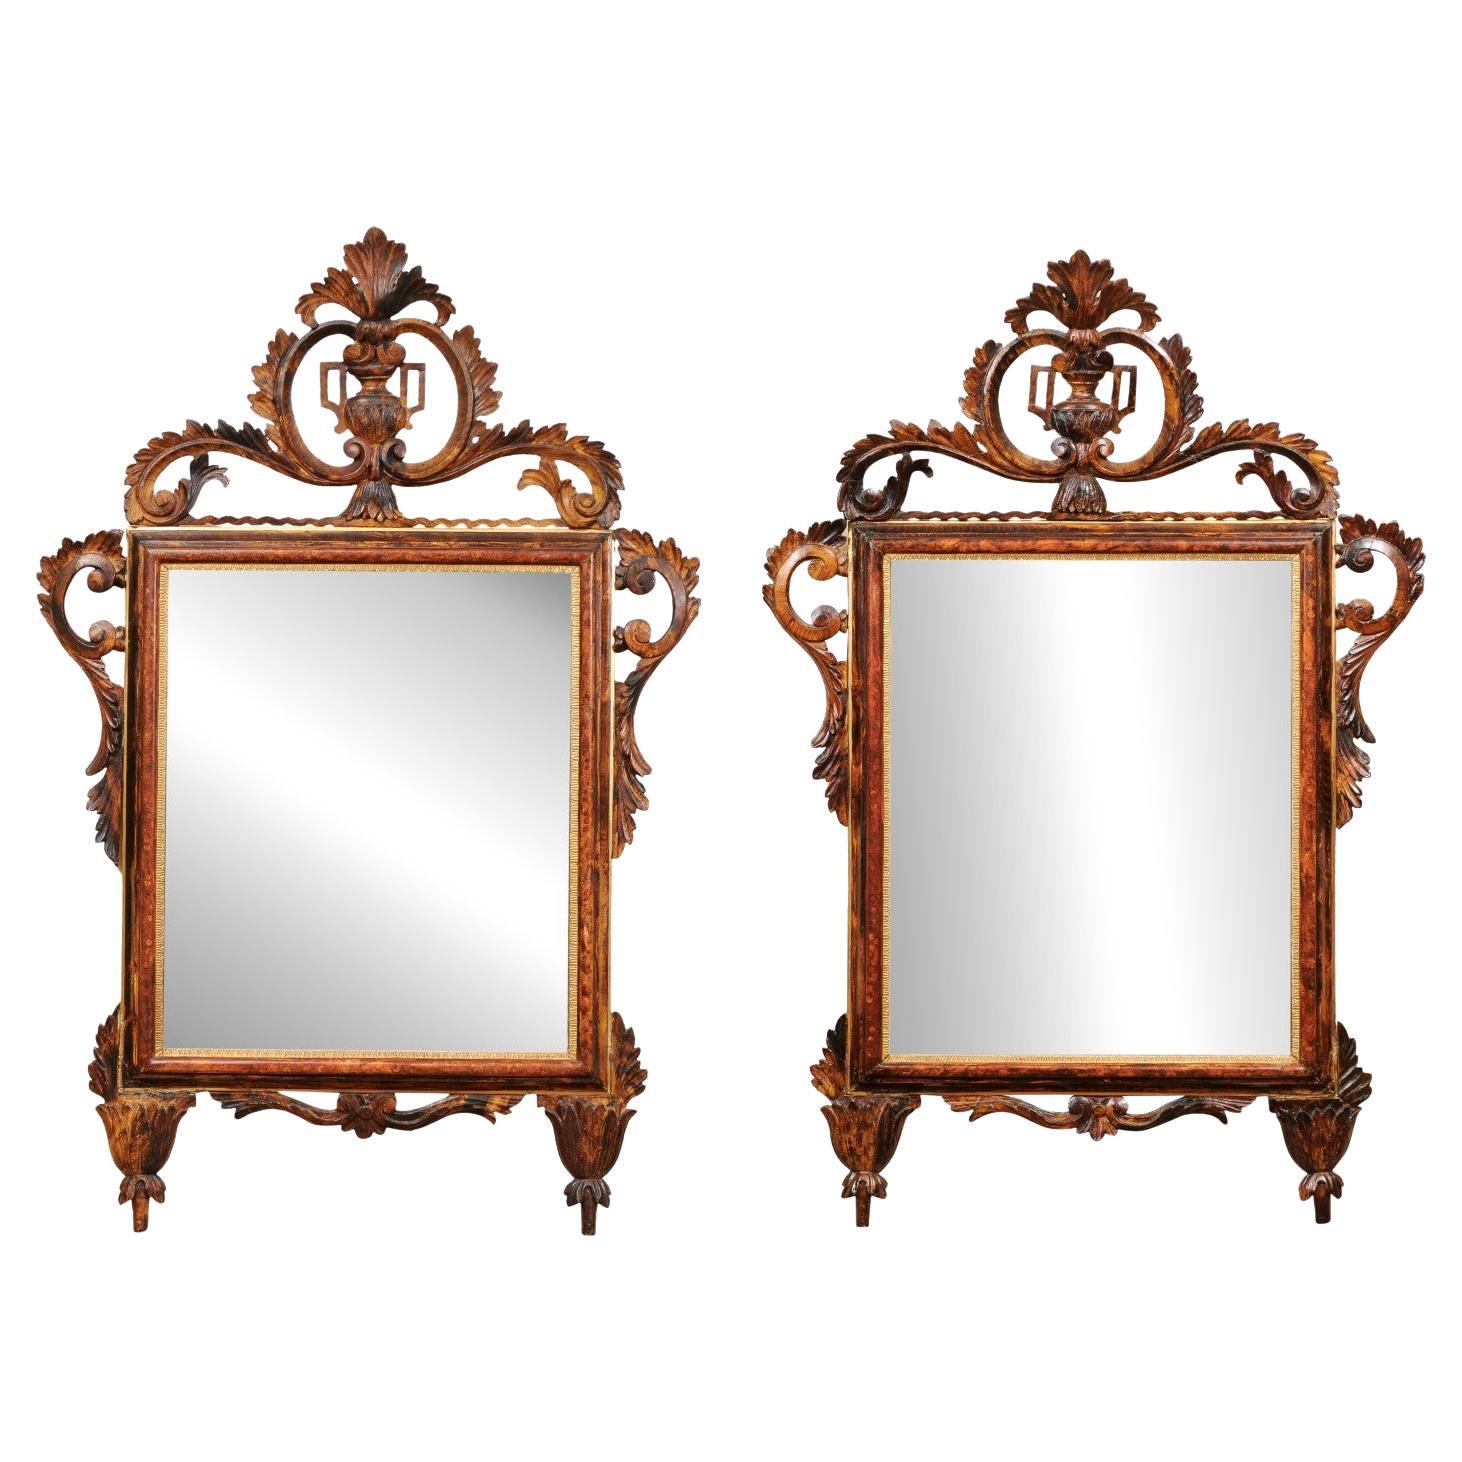 Pair of 19th Century Italian Neoclassical Faux Grain Painted Mirrors 